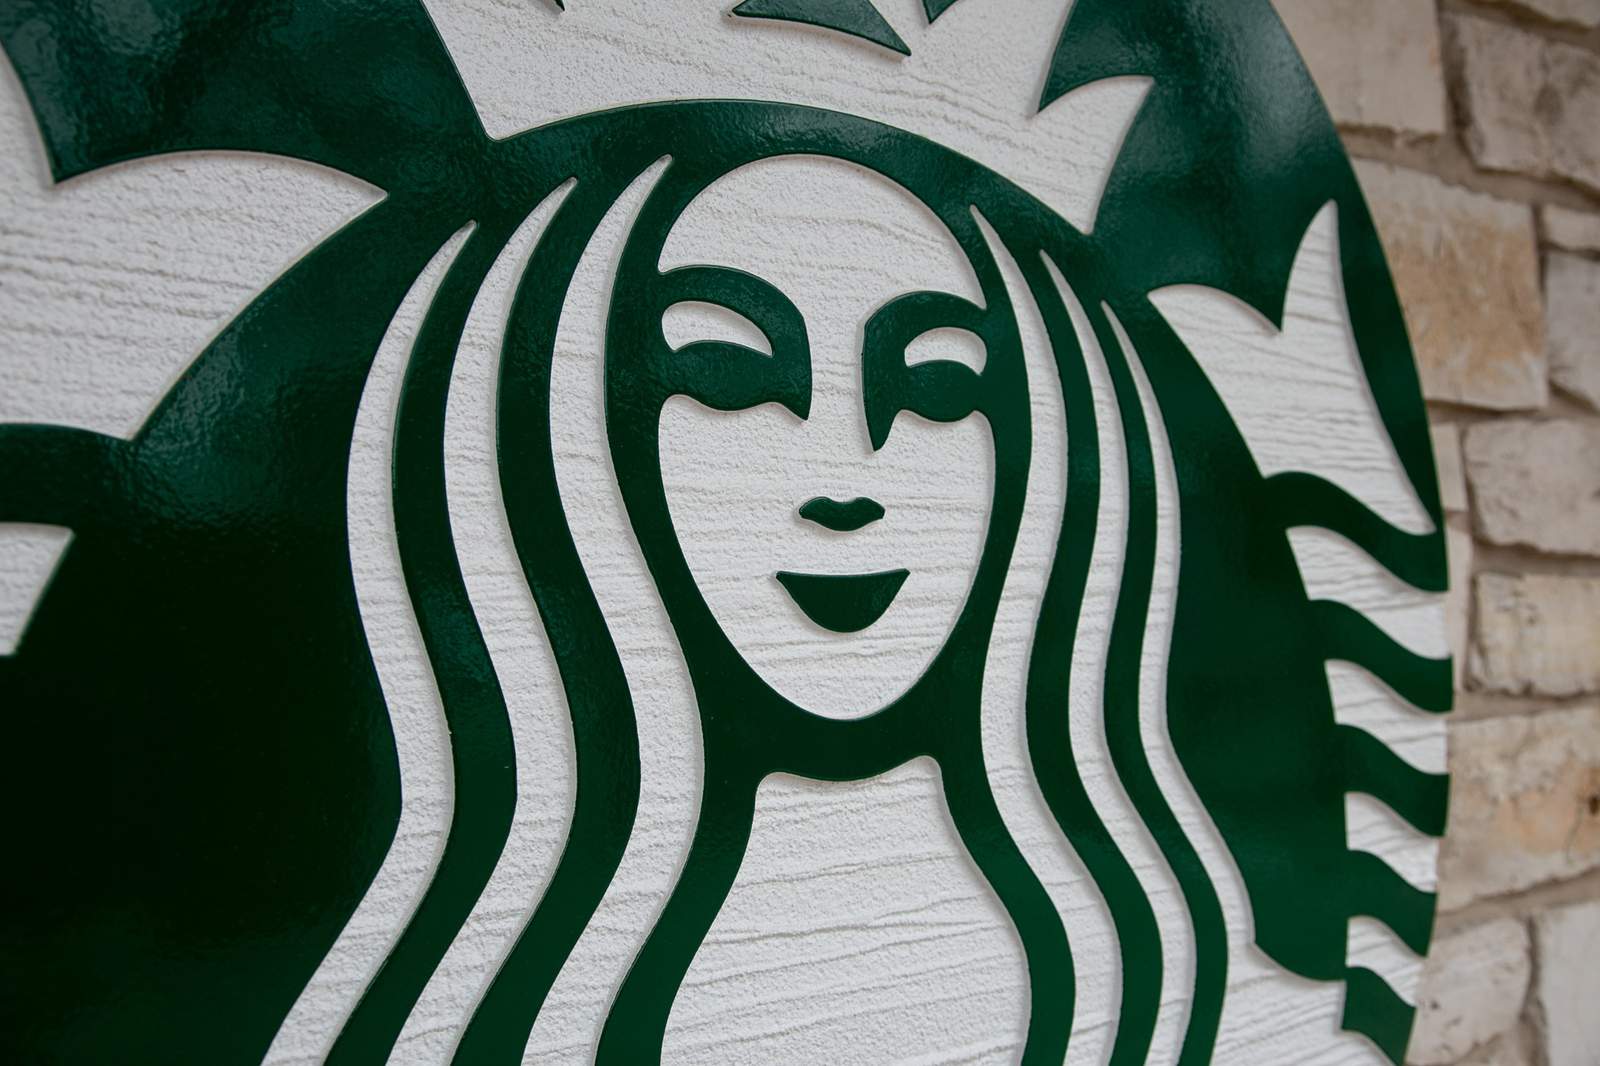 Starbucks supports Black barista’s response in confrontation with anti-mask customer